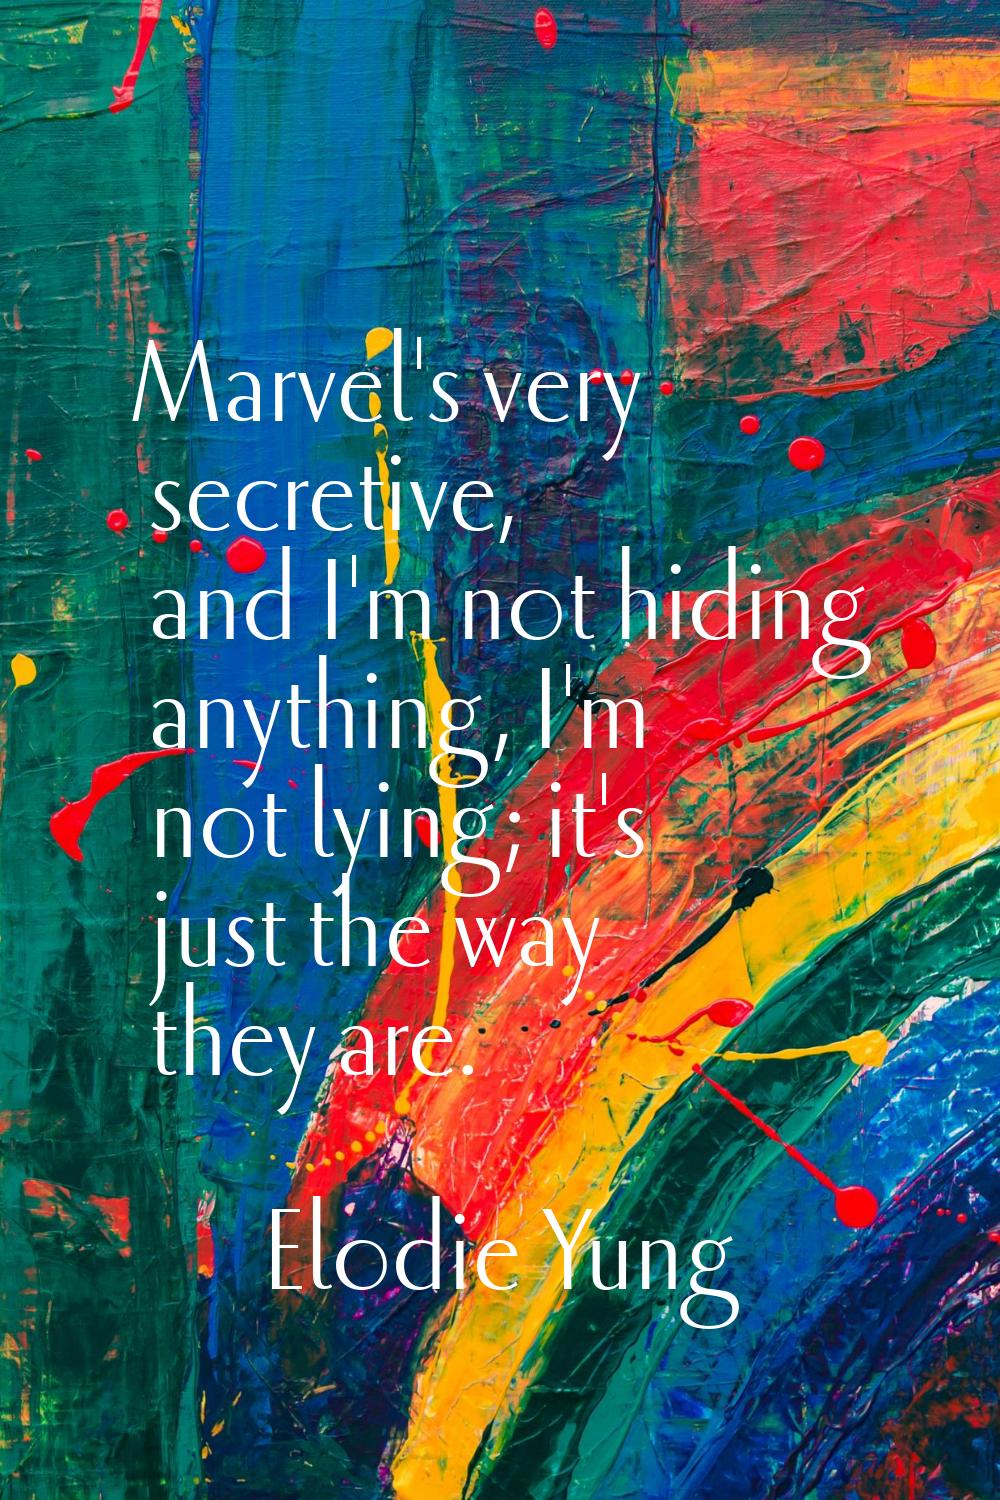 Marvel's very secretive, and I'm not hiding anything, I'm not lying; it's just the way they are.